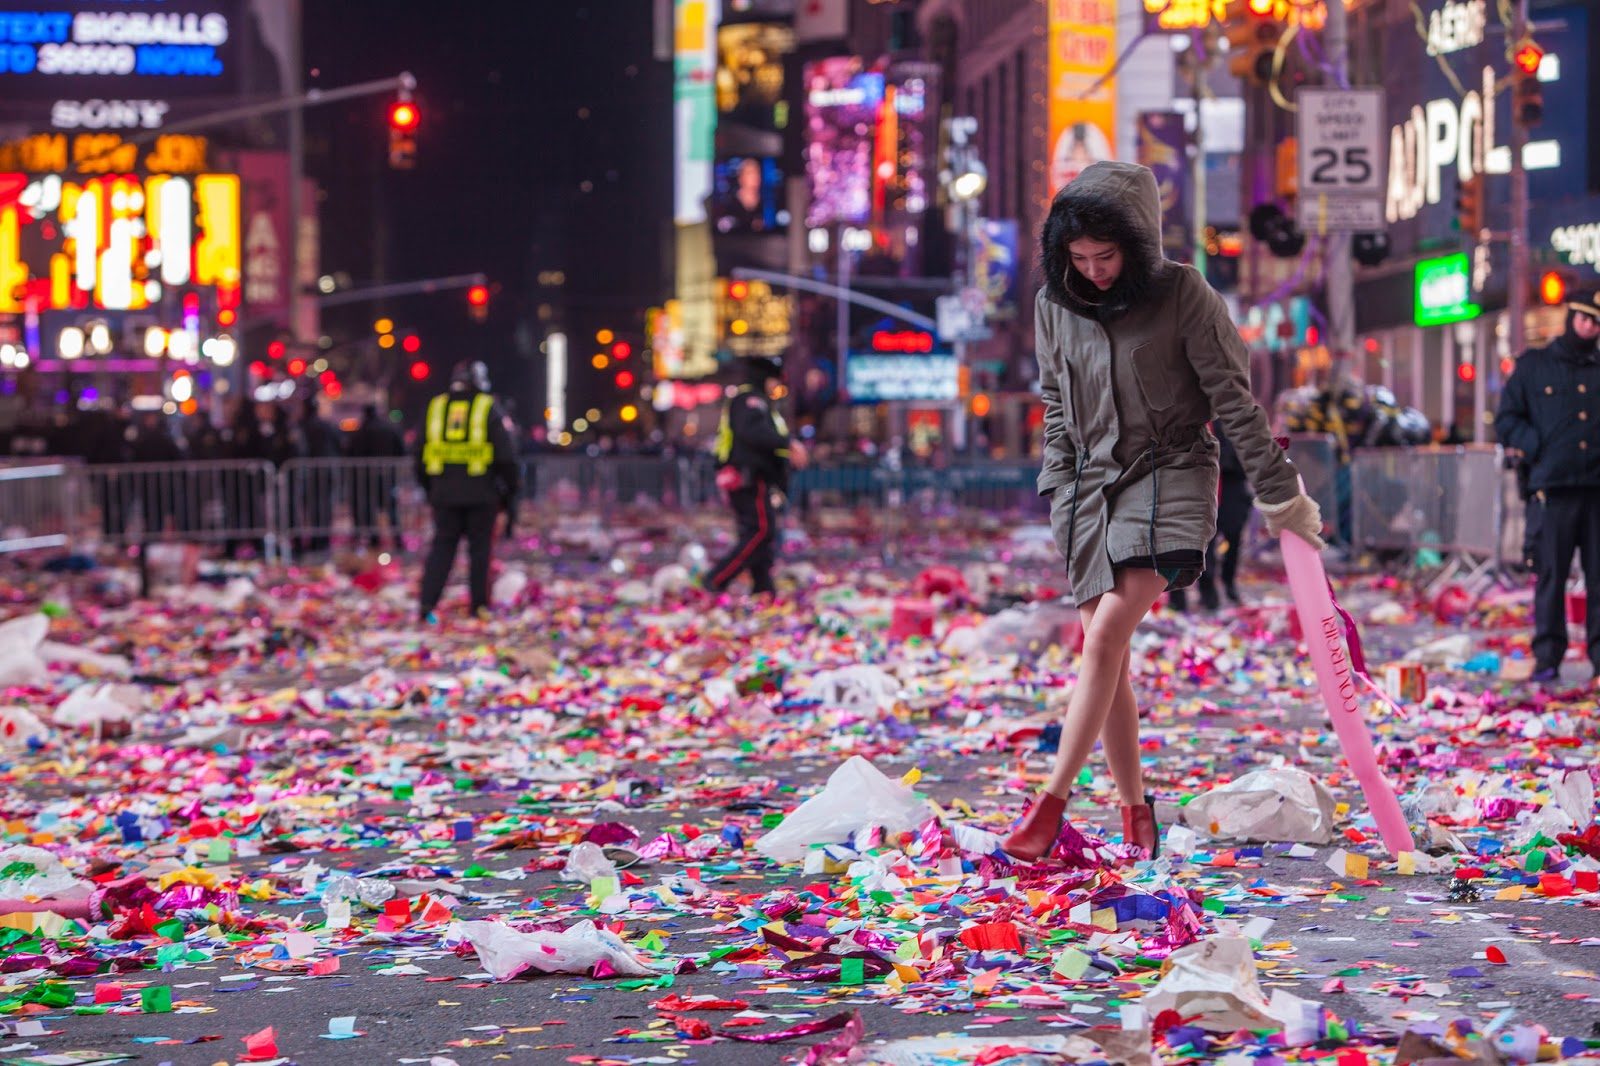 The Impressive Logistics Behind Times Square’s New Year’s Eve